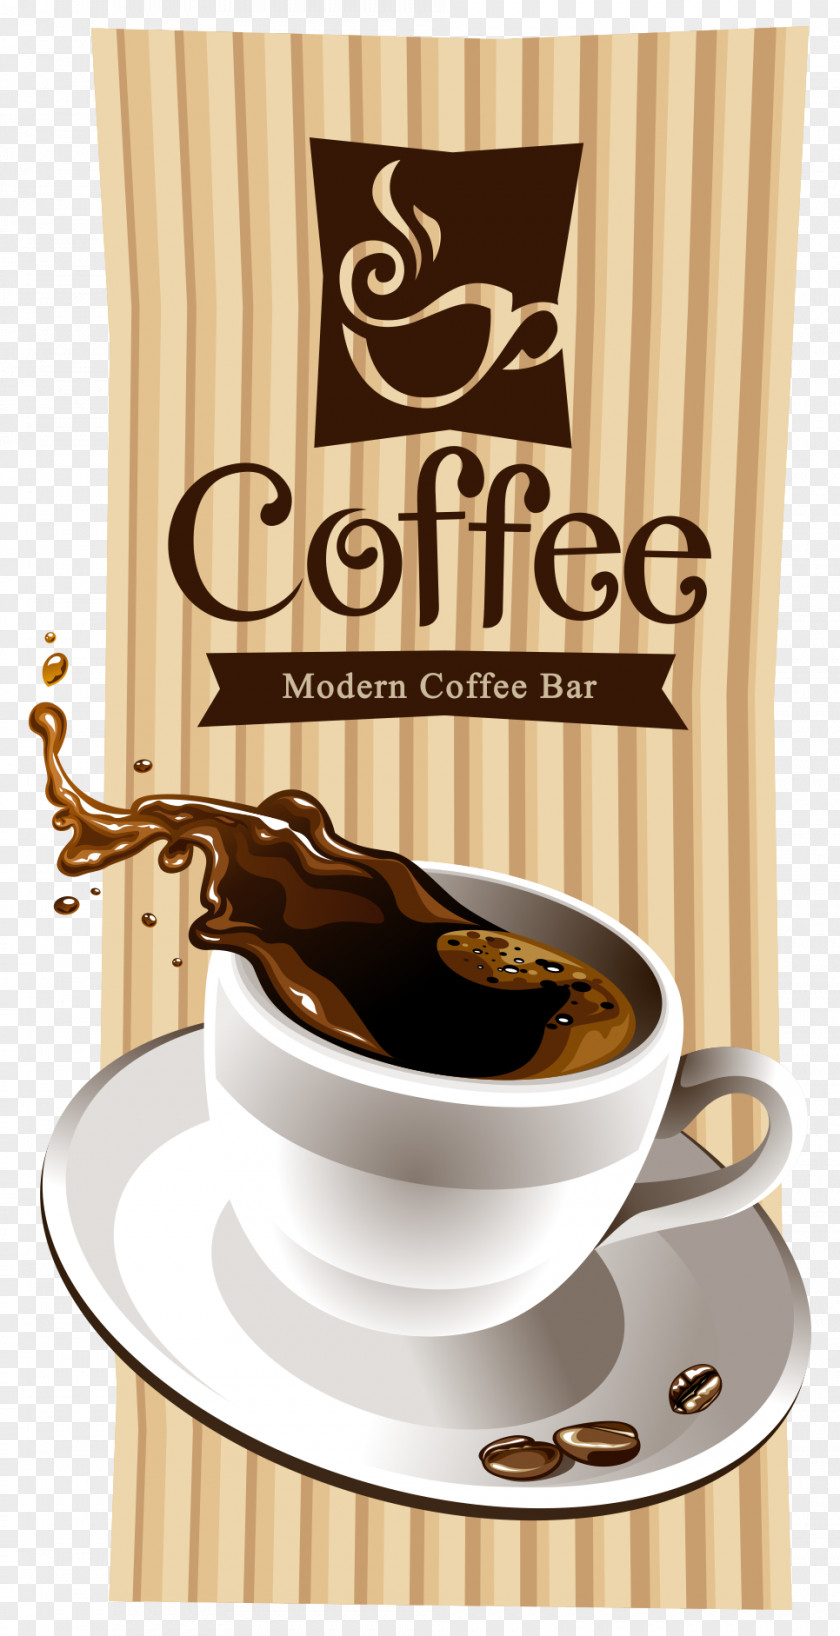 Coffee Poster Vector Pizza Italian Cuisine Cafe Restaurant PNG